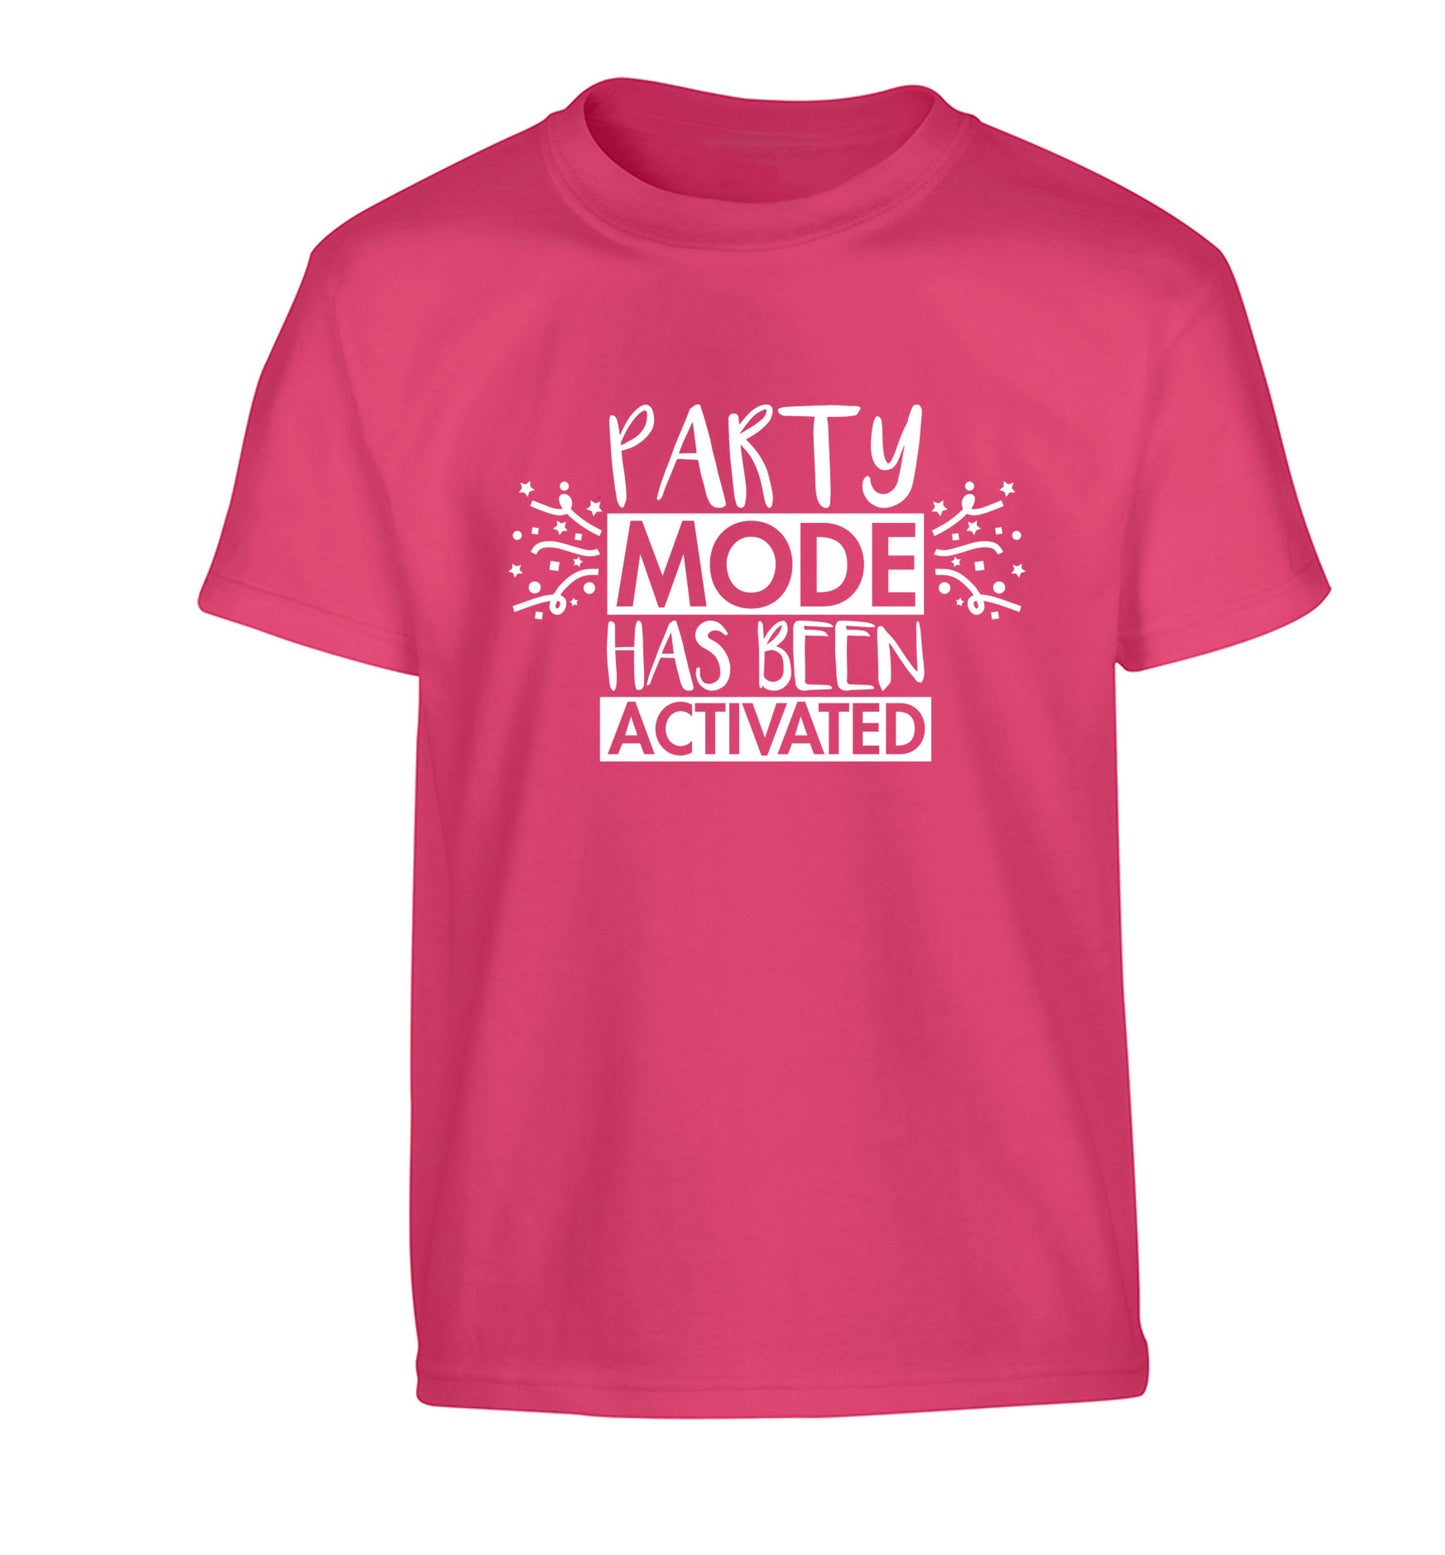 Please do not disturb party mode has been activated Children's pink Tshirt 12-14 Years